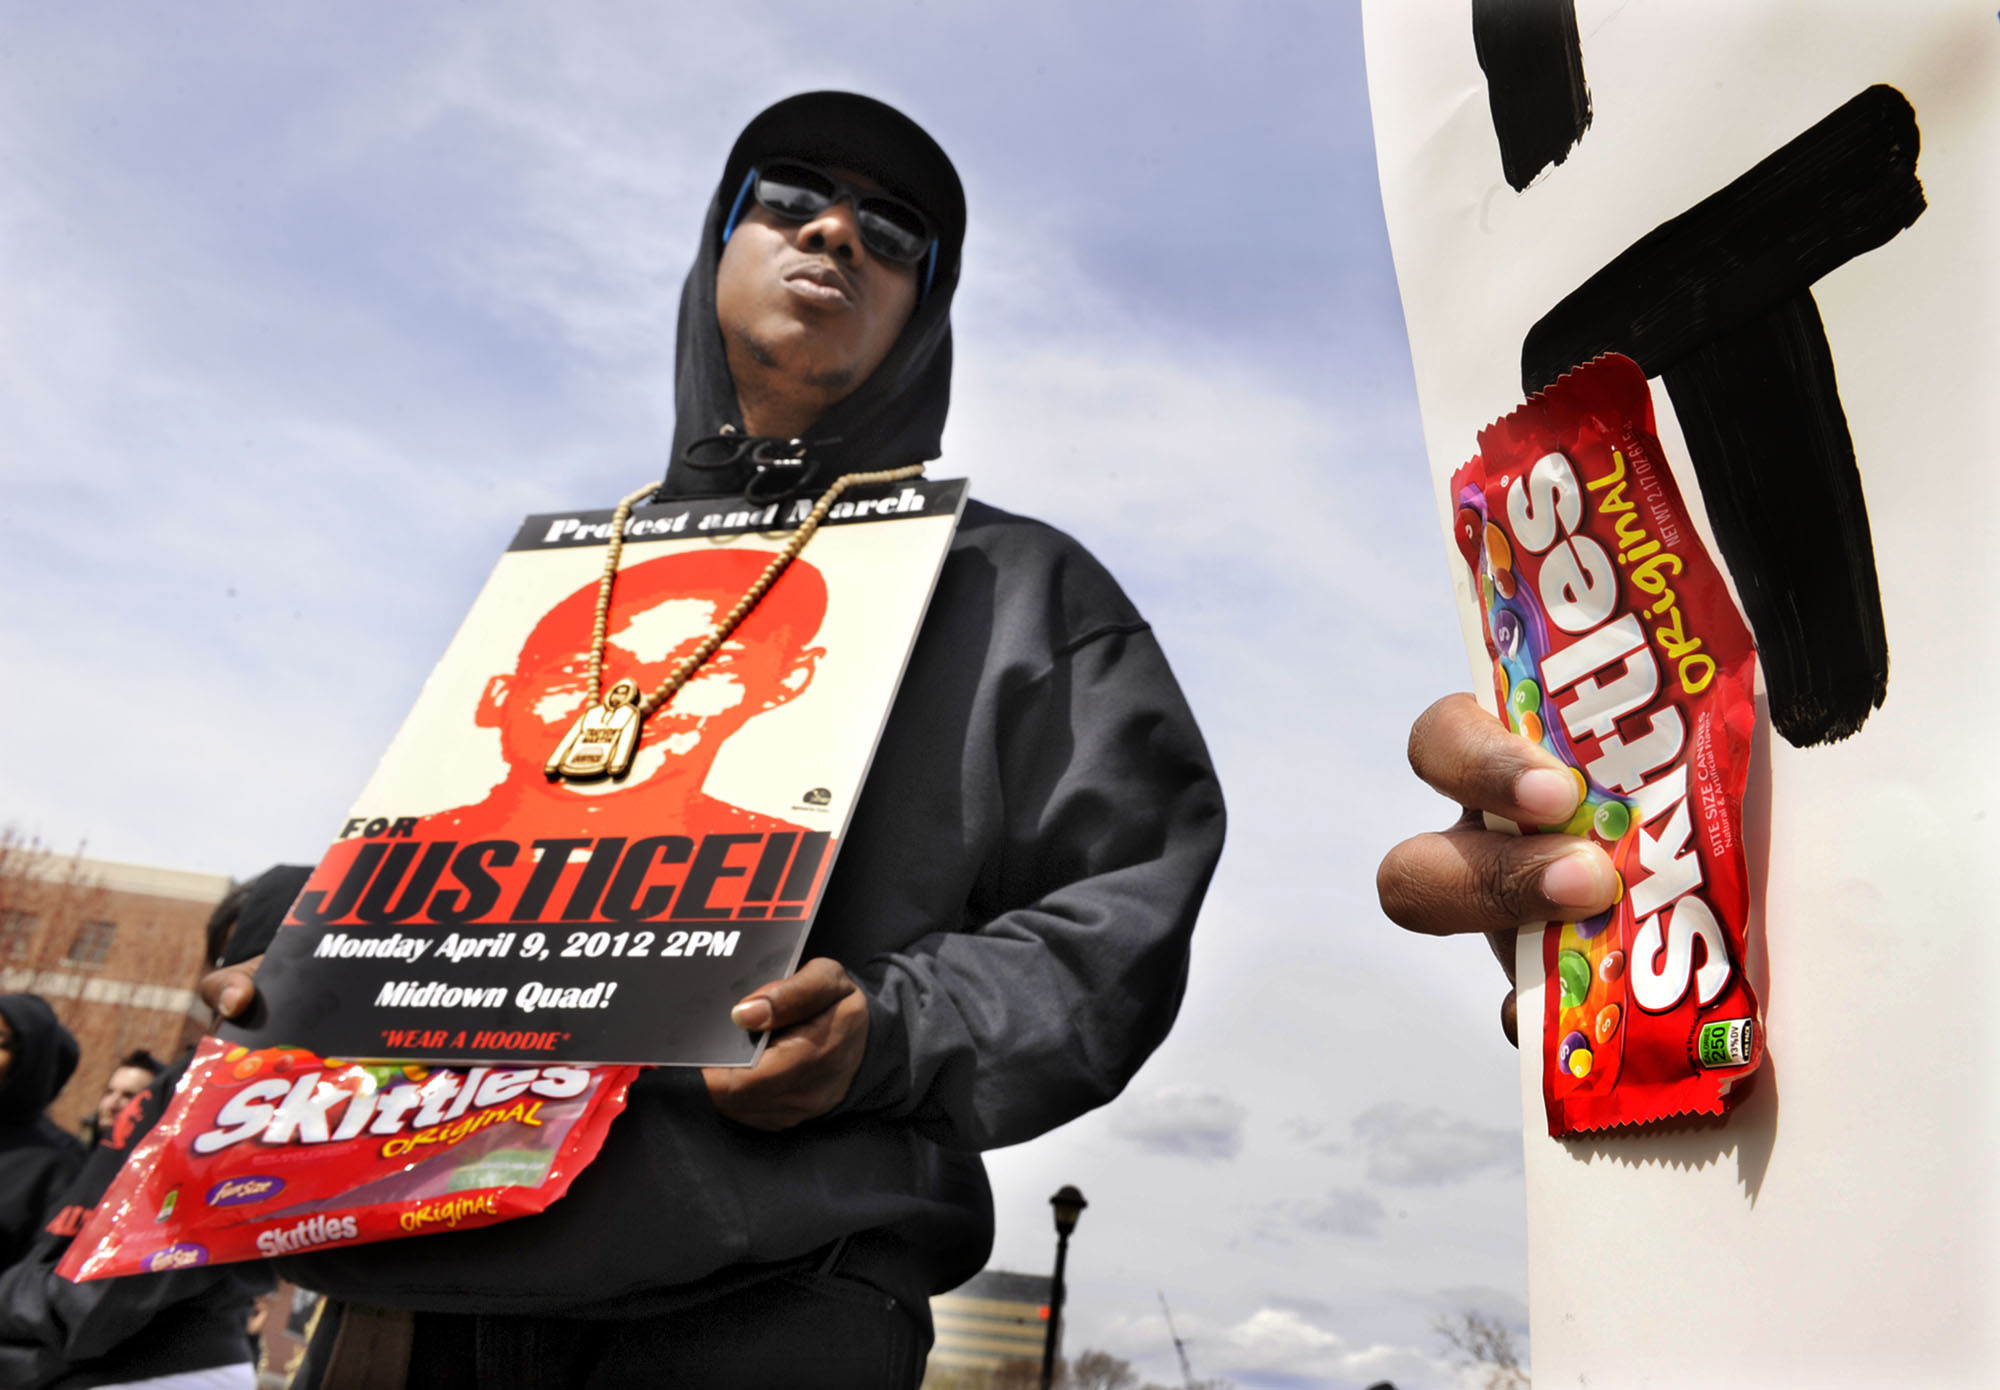 A University student takes part in a silent protest on campus, to remember Trayvon Martin, the Florida youth killed by a neighborhood watch coordinator. He was carrying Skittles when he was shot.